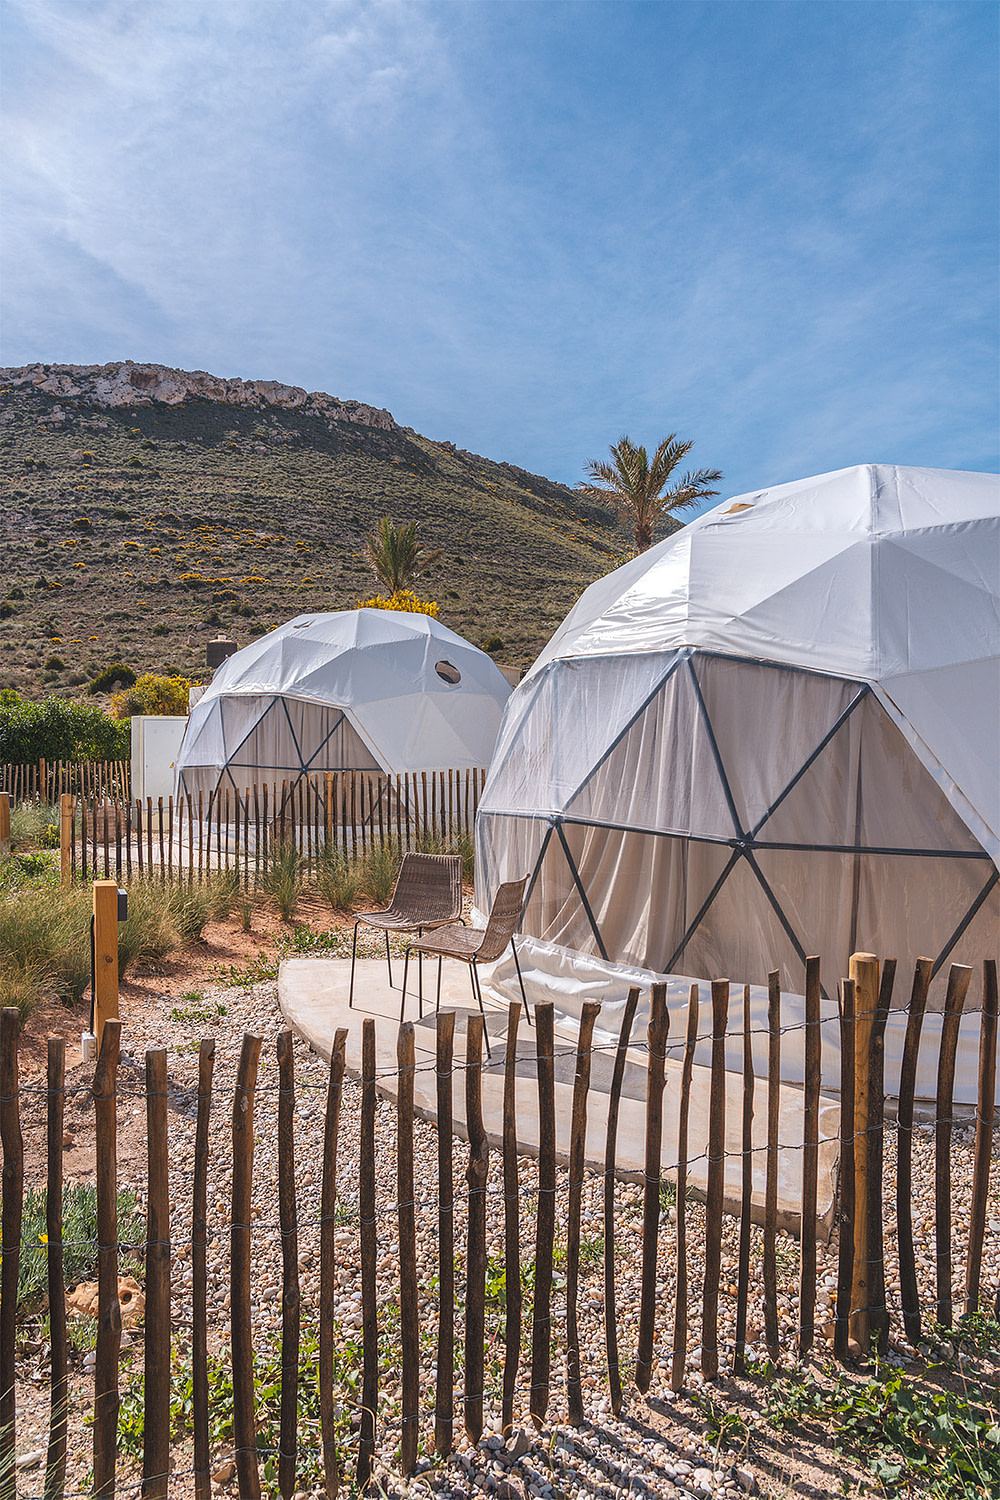 Domes for stargazing